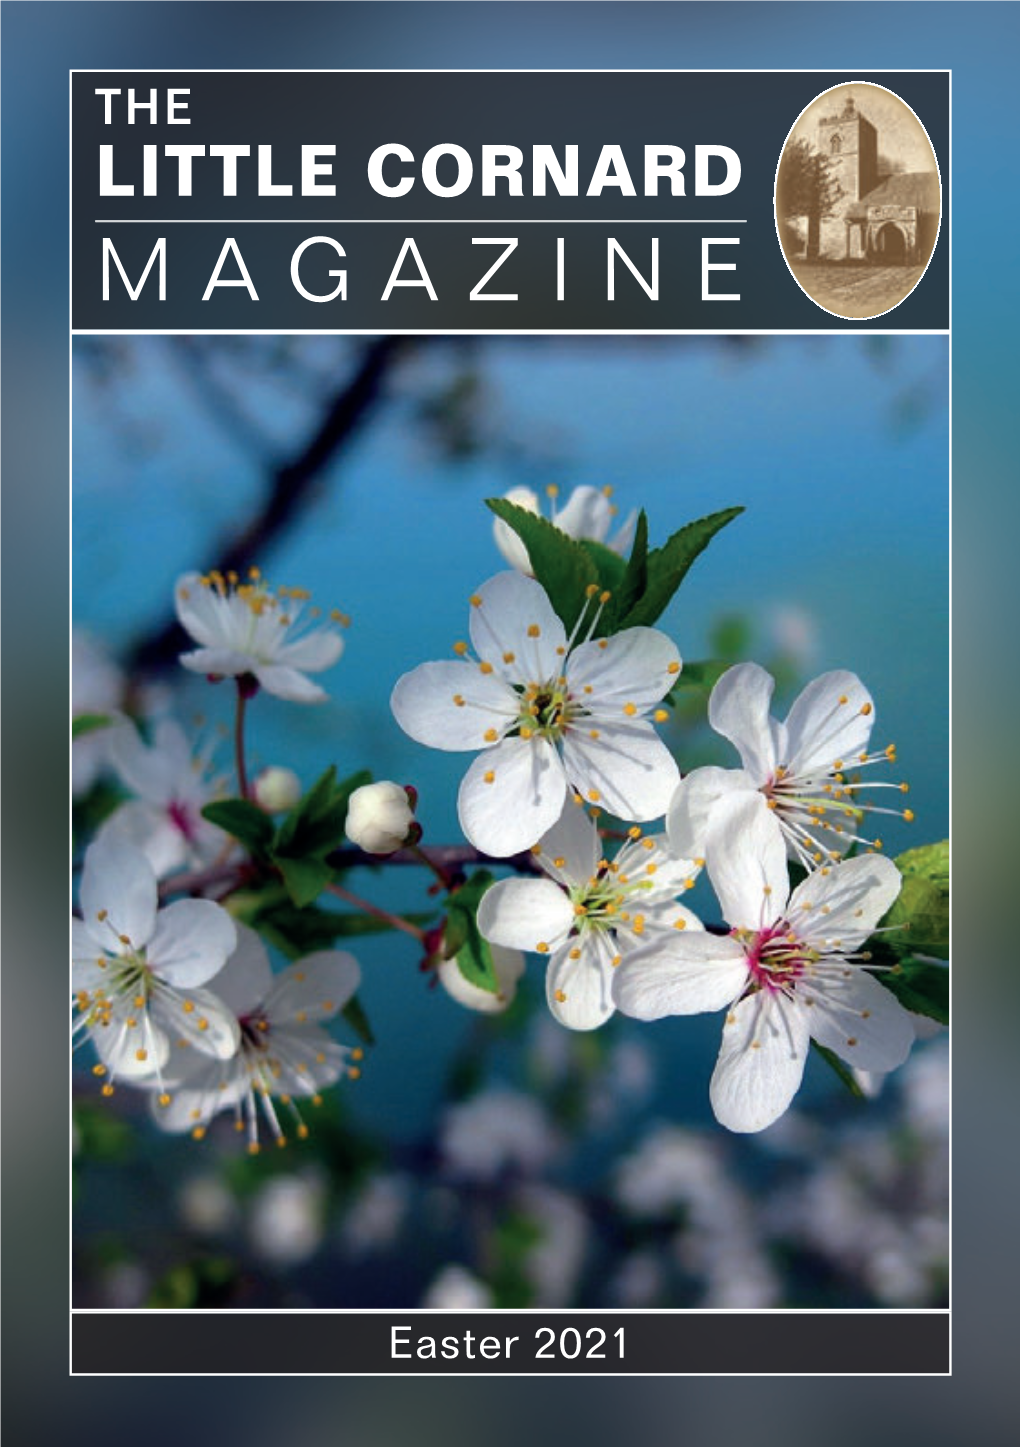 Magazine Easter 2021.Qxp Layout 1 15/03/2021 13:47 Page 1